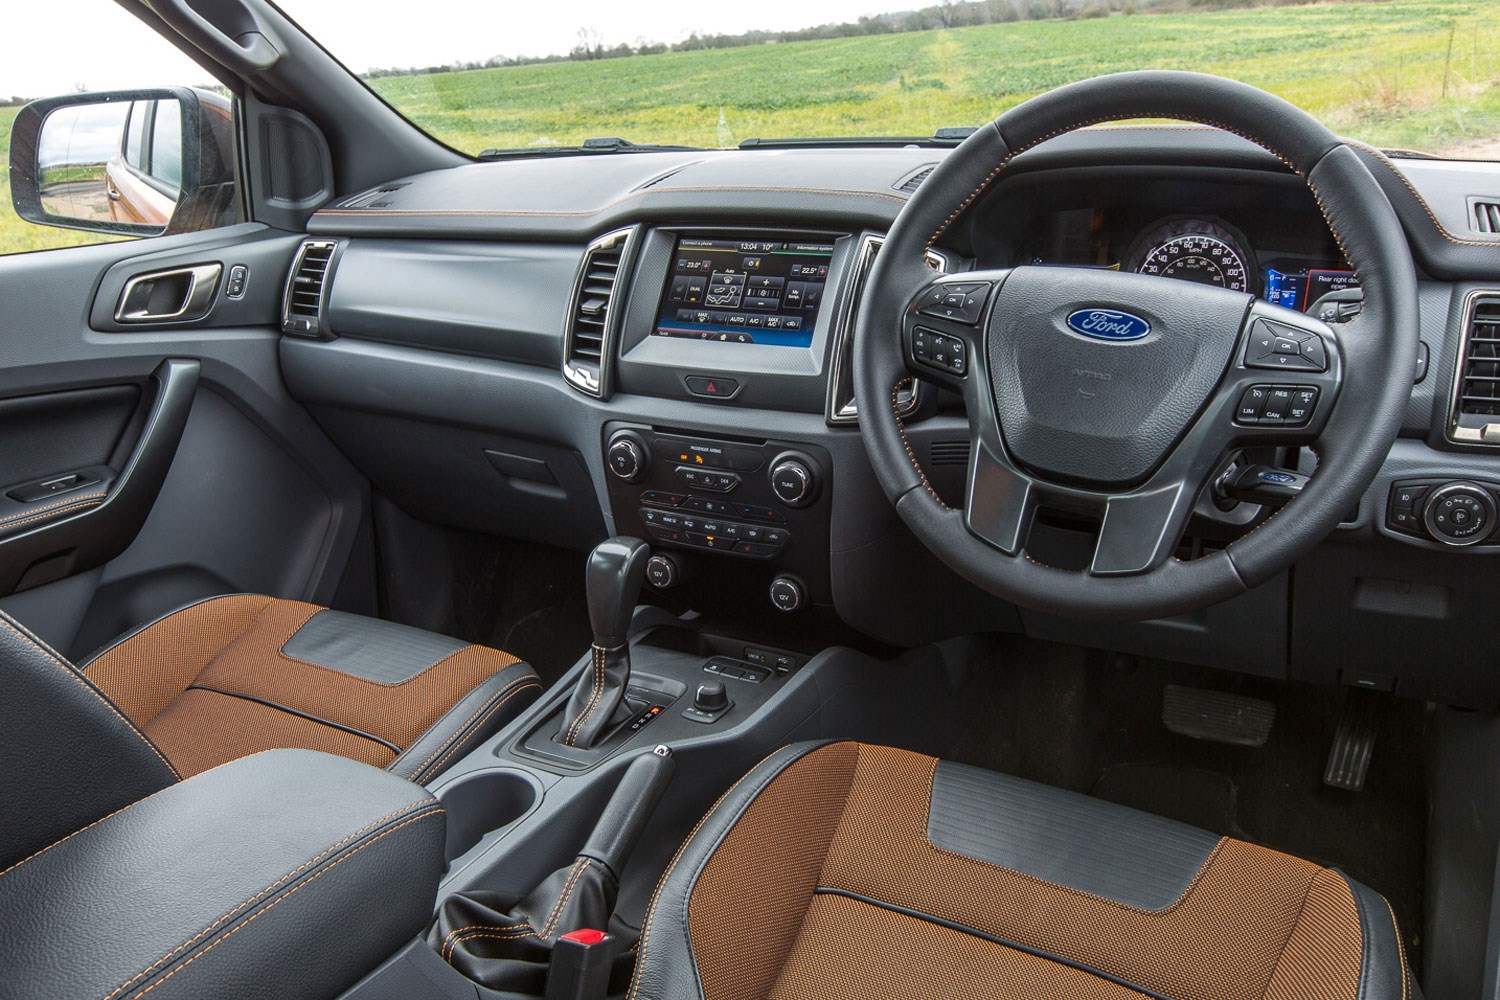 Ford Ranger review - 2016 facelift cab interior showing seats, steering wheel and dashboard